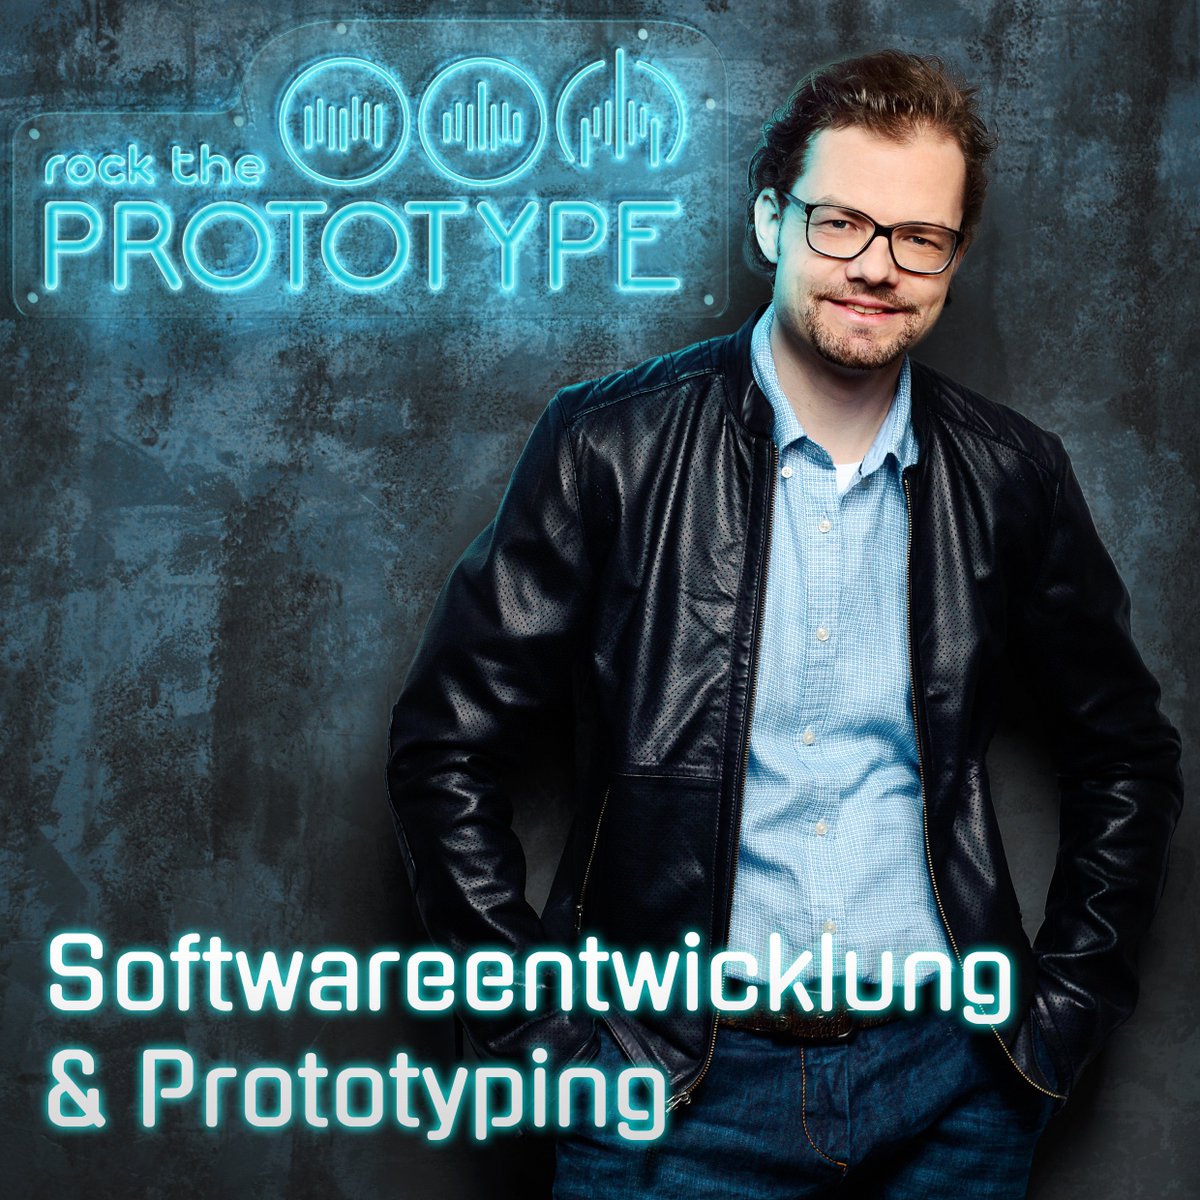 Rock the Prototype - Softwareentwicklung & Prototyping: Der #Podcast für praxisnahe Tipps und Insights rund um #Softwareentwicklung & #Prototyping

Apple Podcasts: apple.co/3CpdfTs

Spotify Podcast: spoti.fi/3NJwdLJ

#podcasts